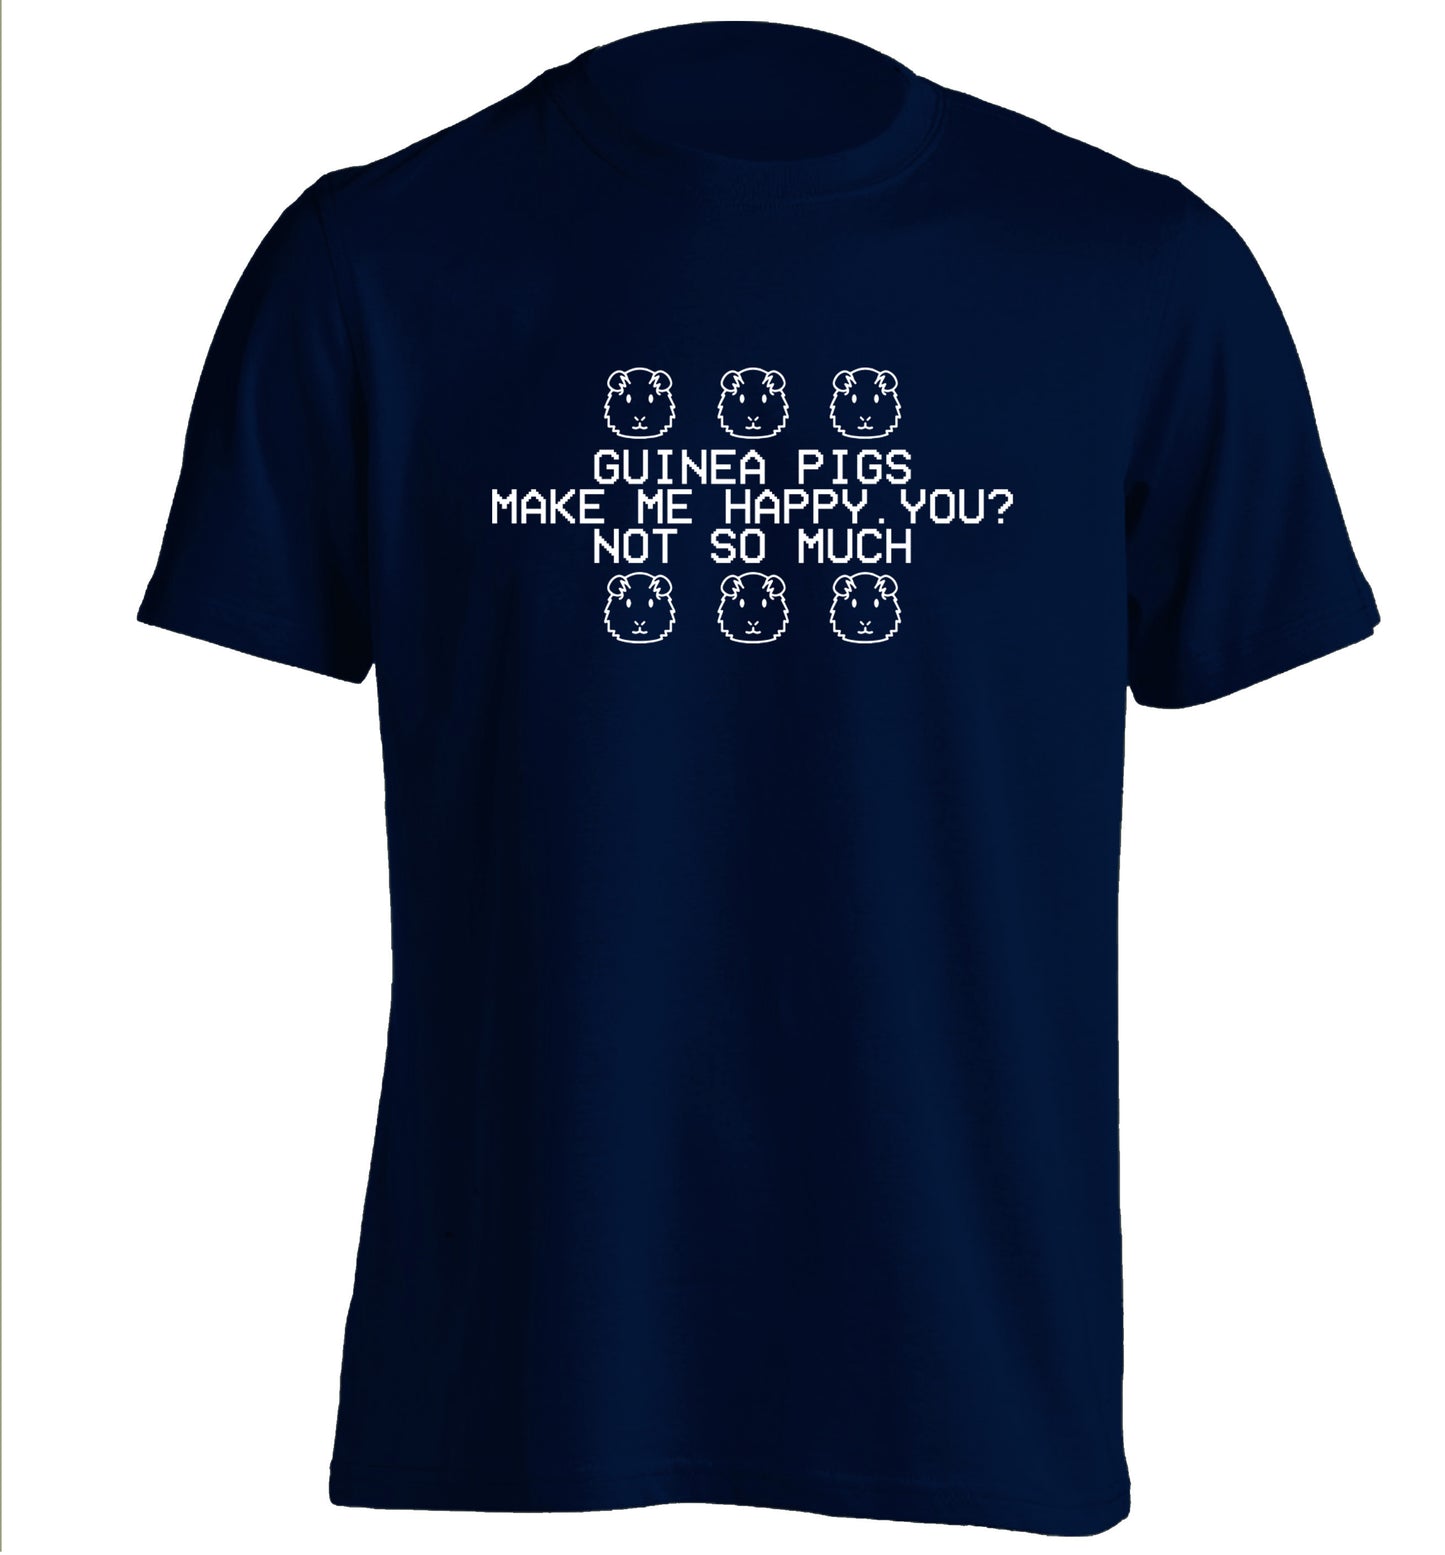 Guinea pigs make me happy, you not so much adults unisex navy Tshirt 2XL